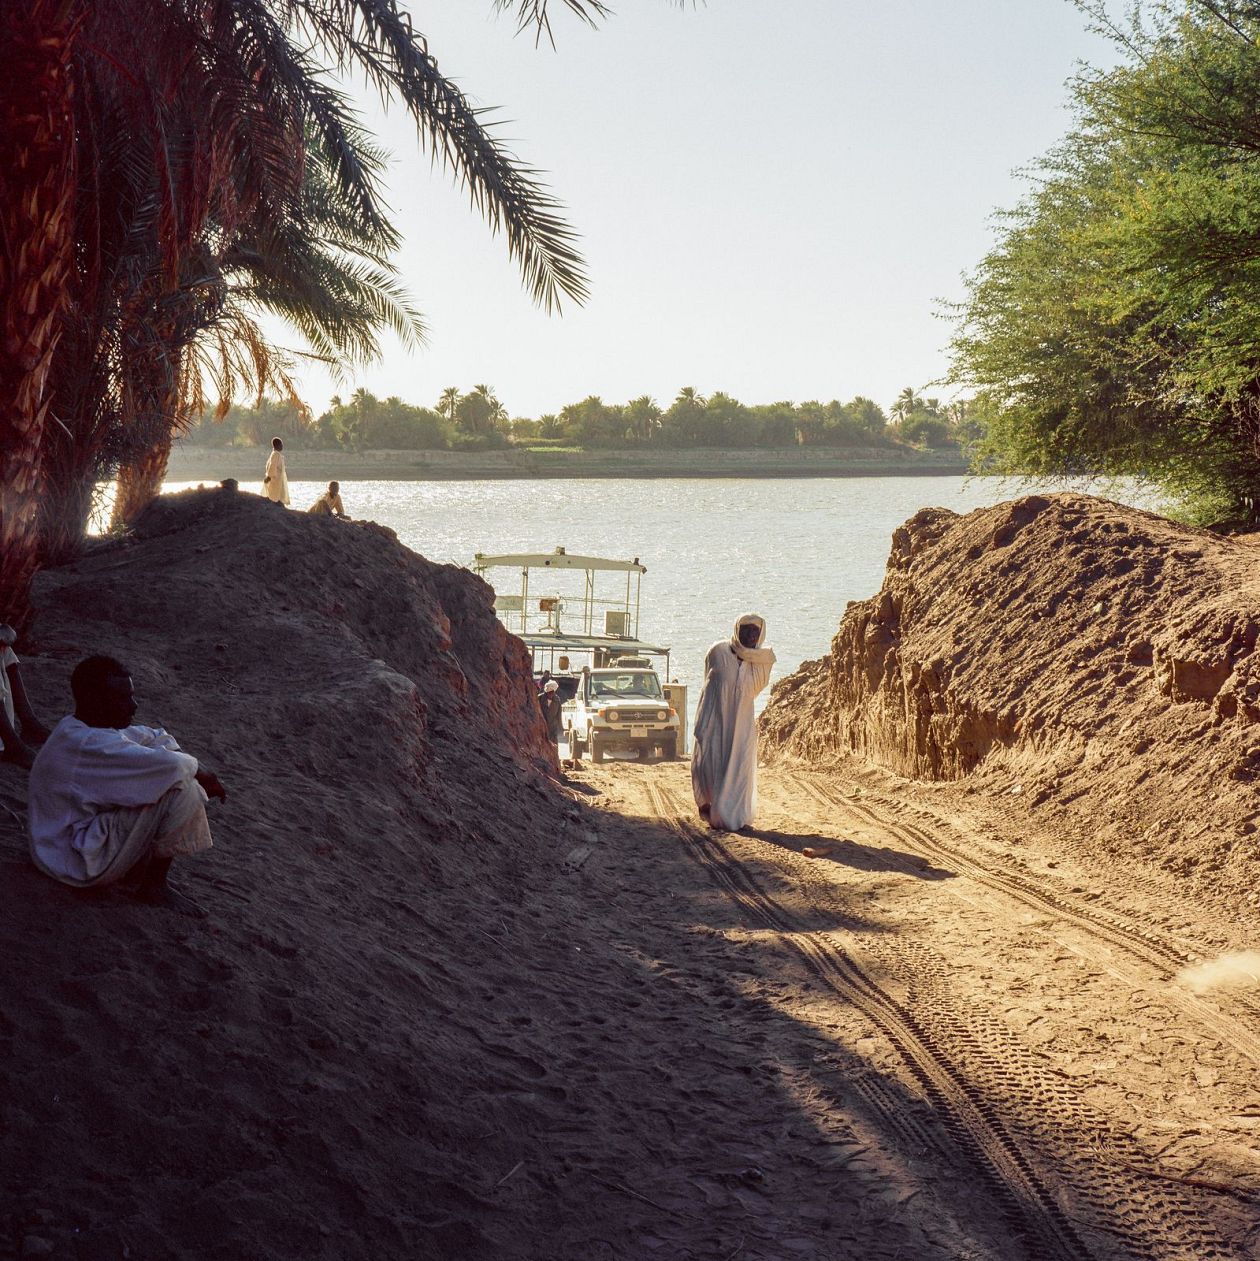 A young couple walks along the bank of the Nile river in Nubia, Sudan